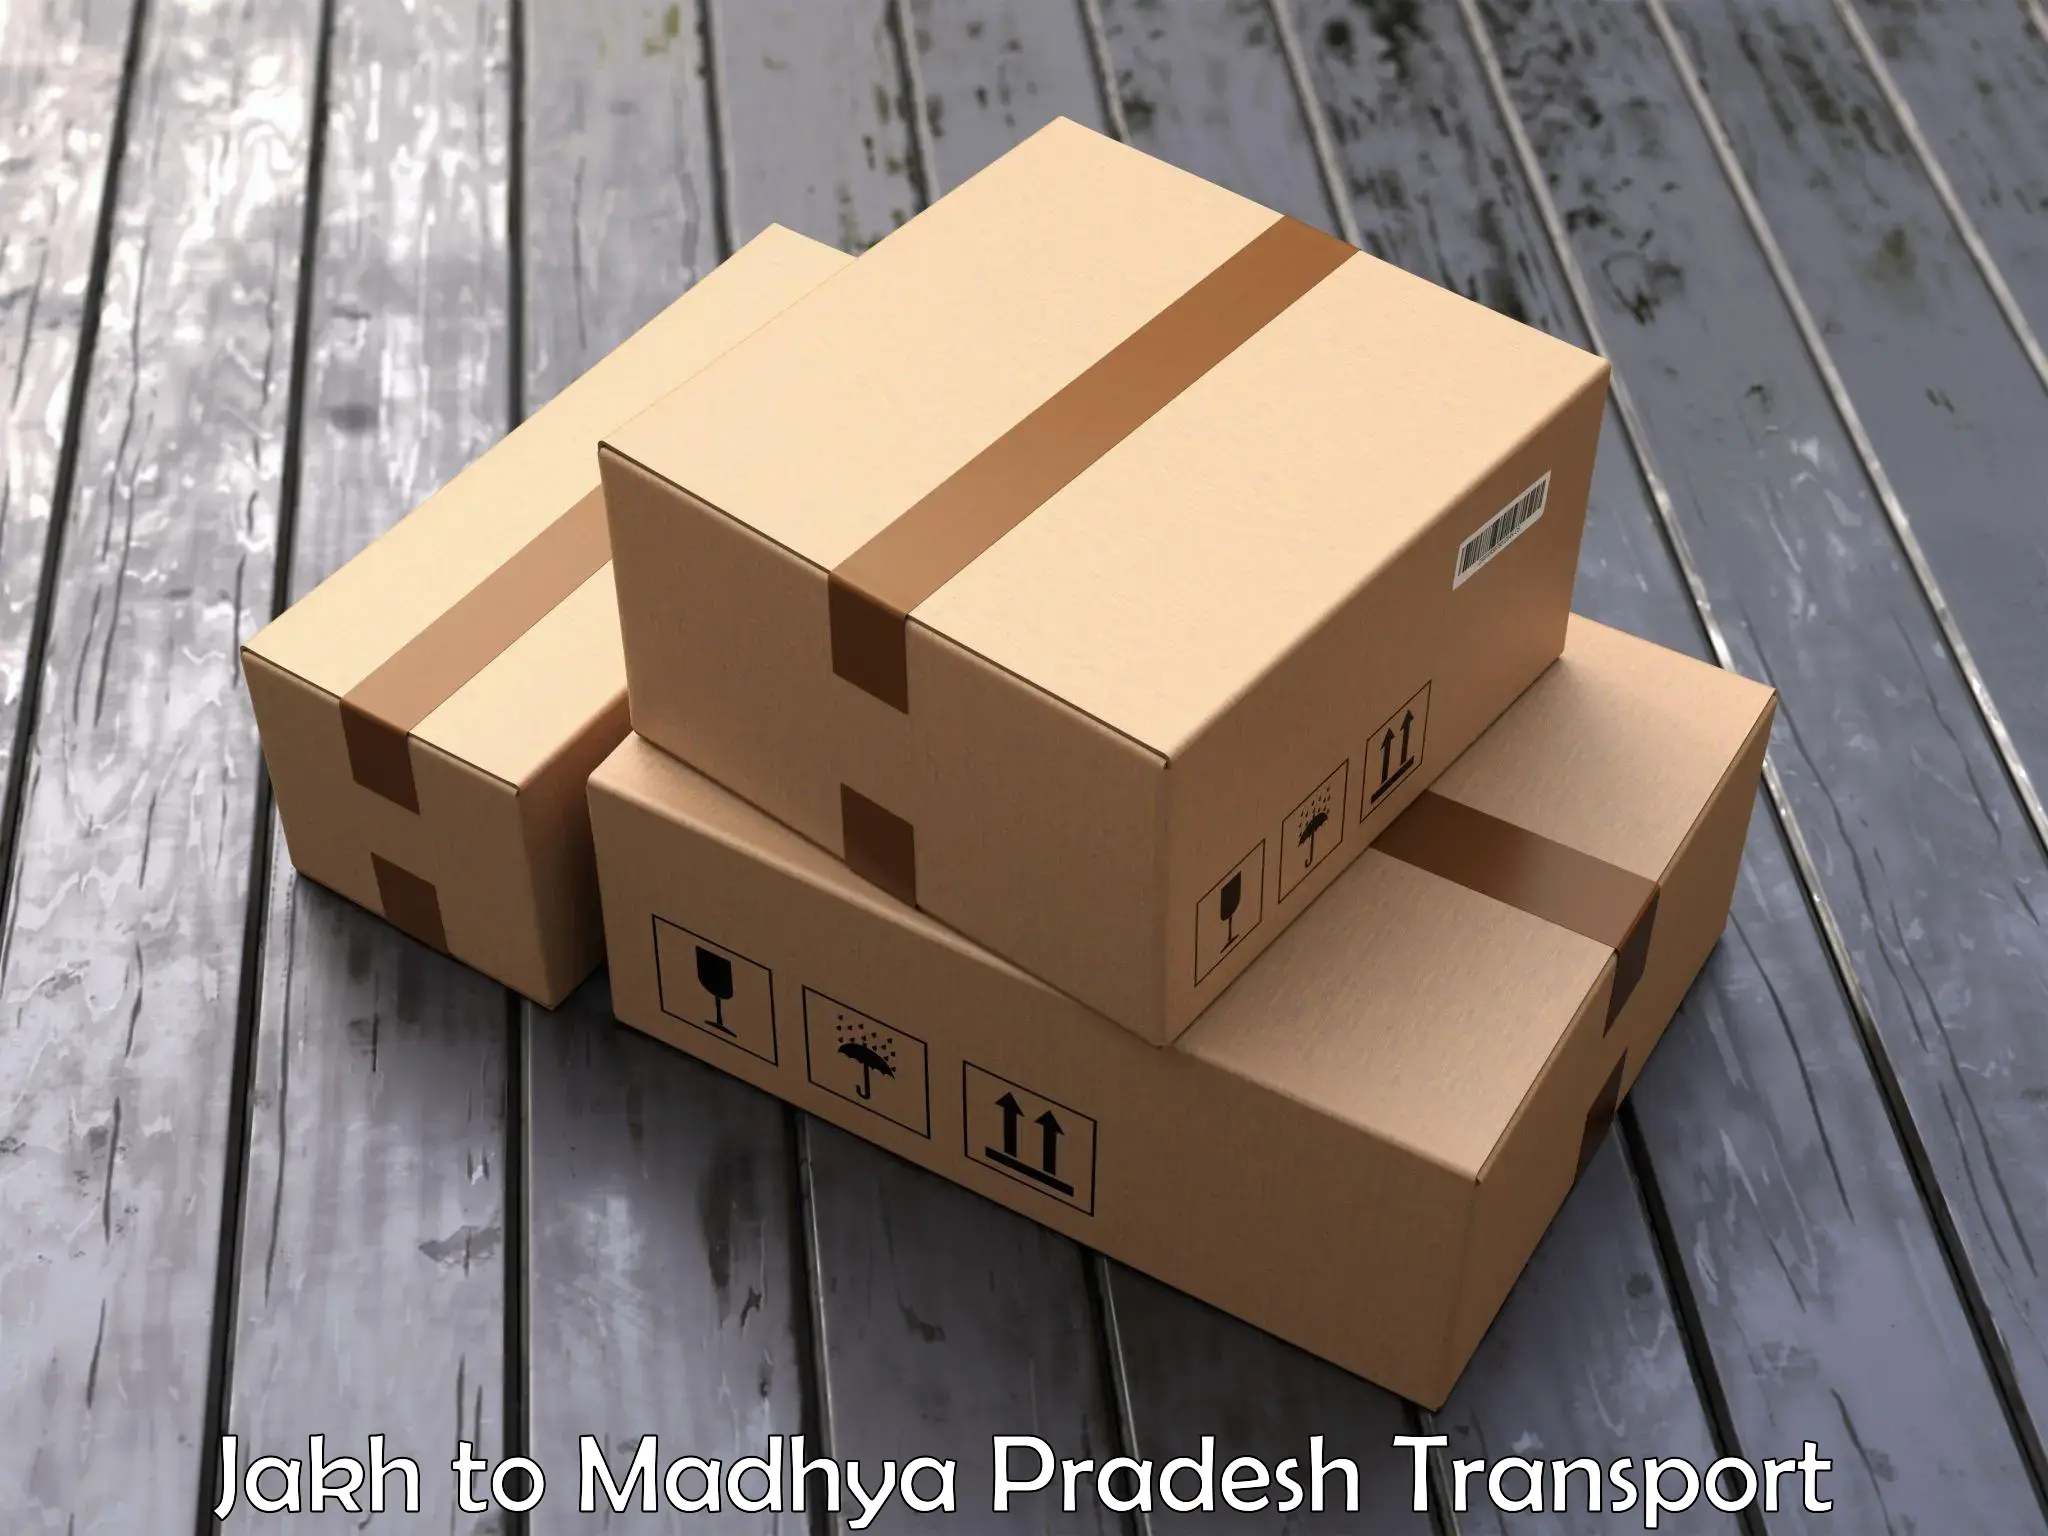 Truck transport companies in India Jakh to Pawai